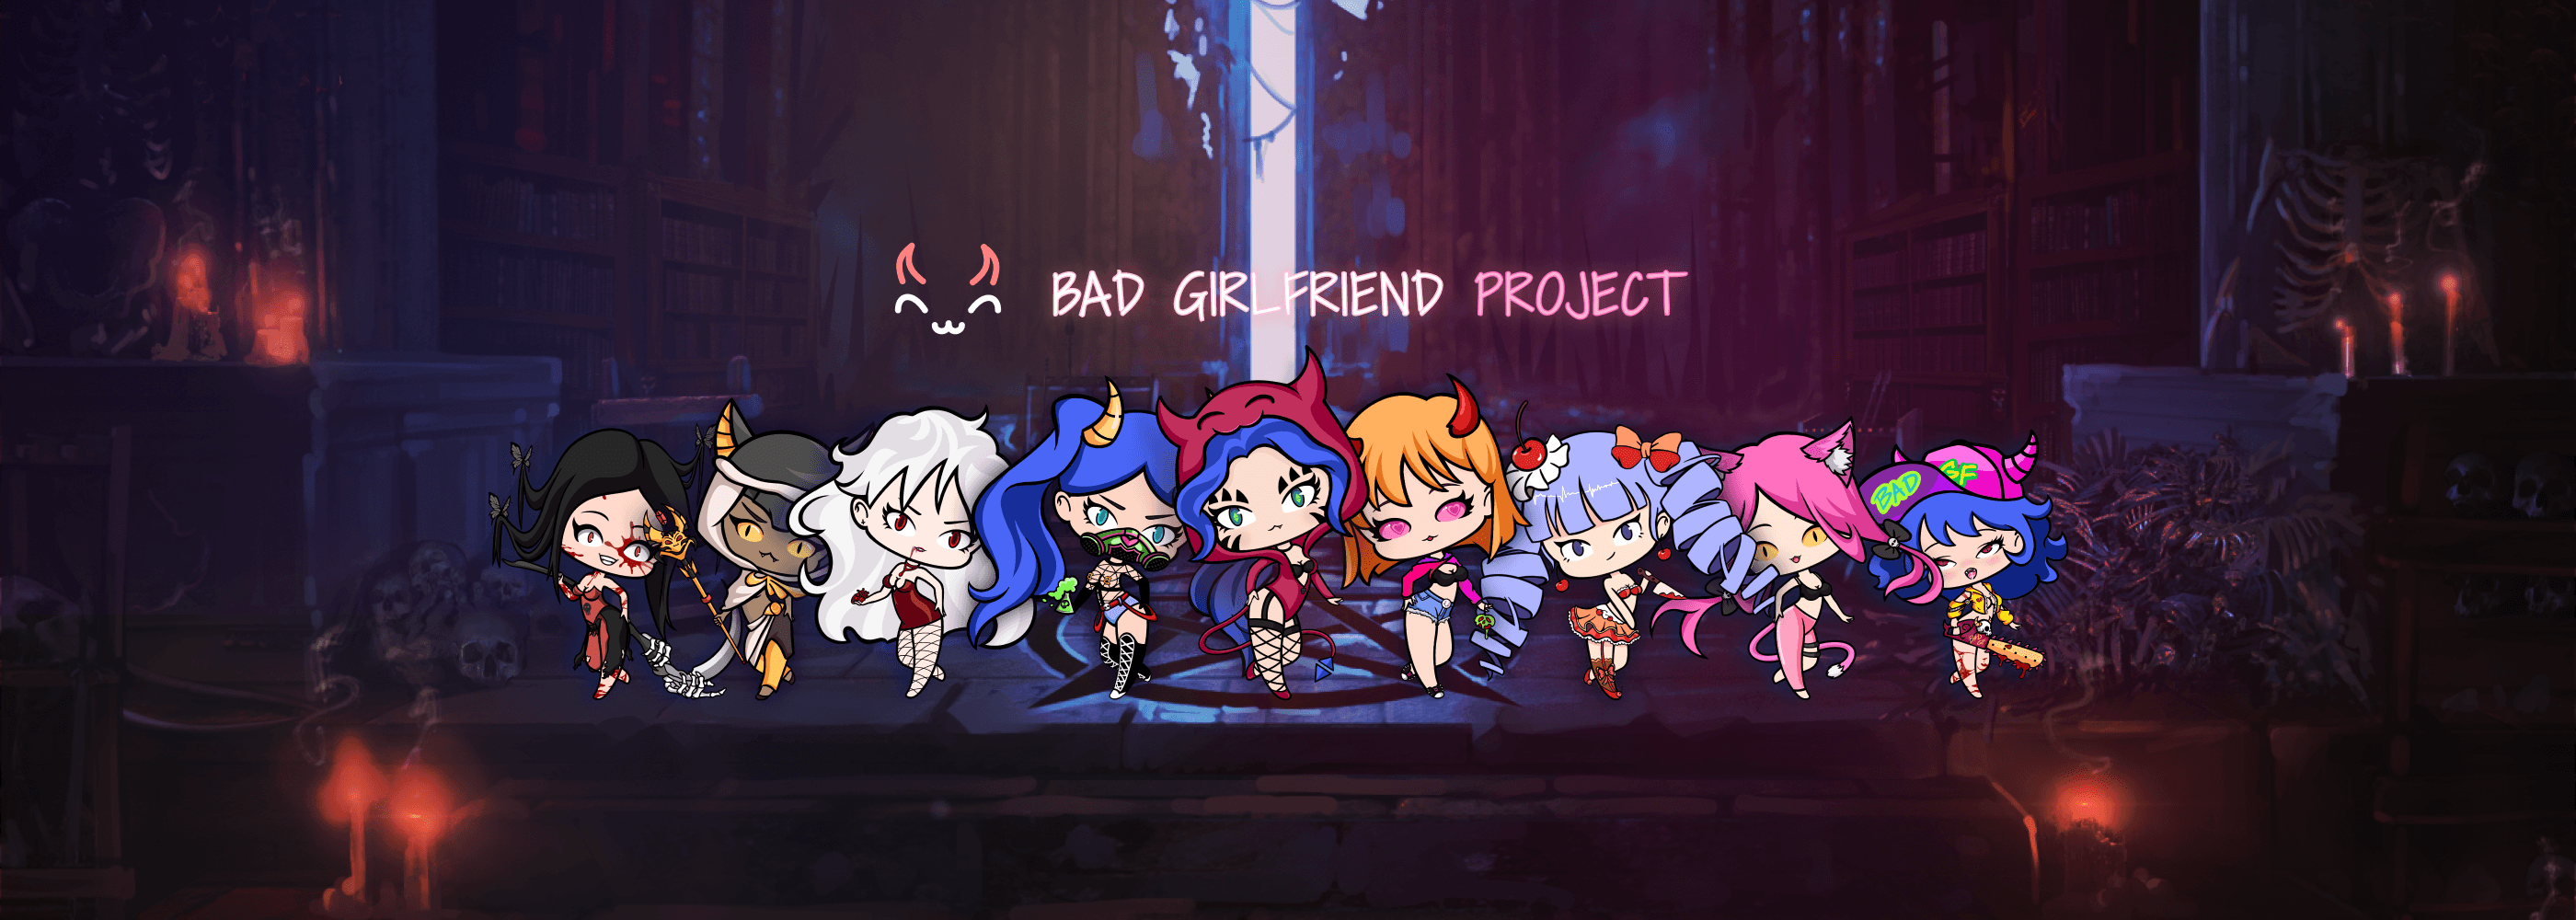 Bad Girlfriend Project Official